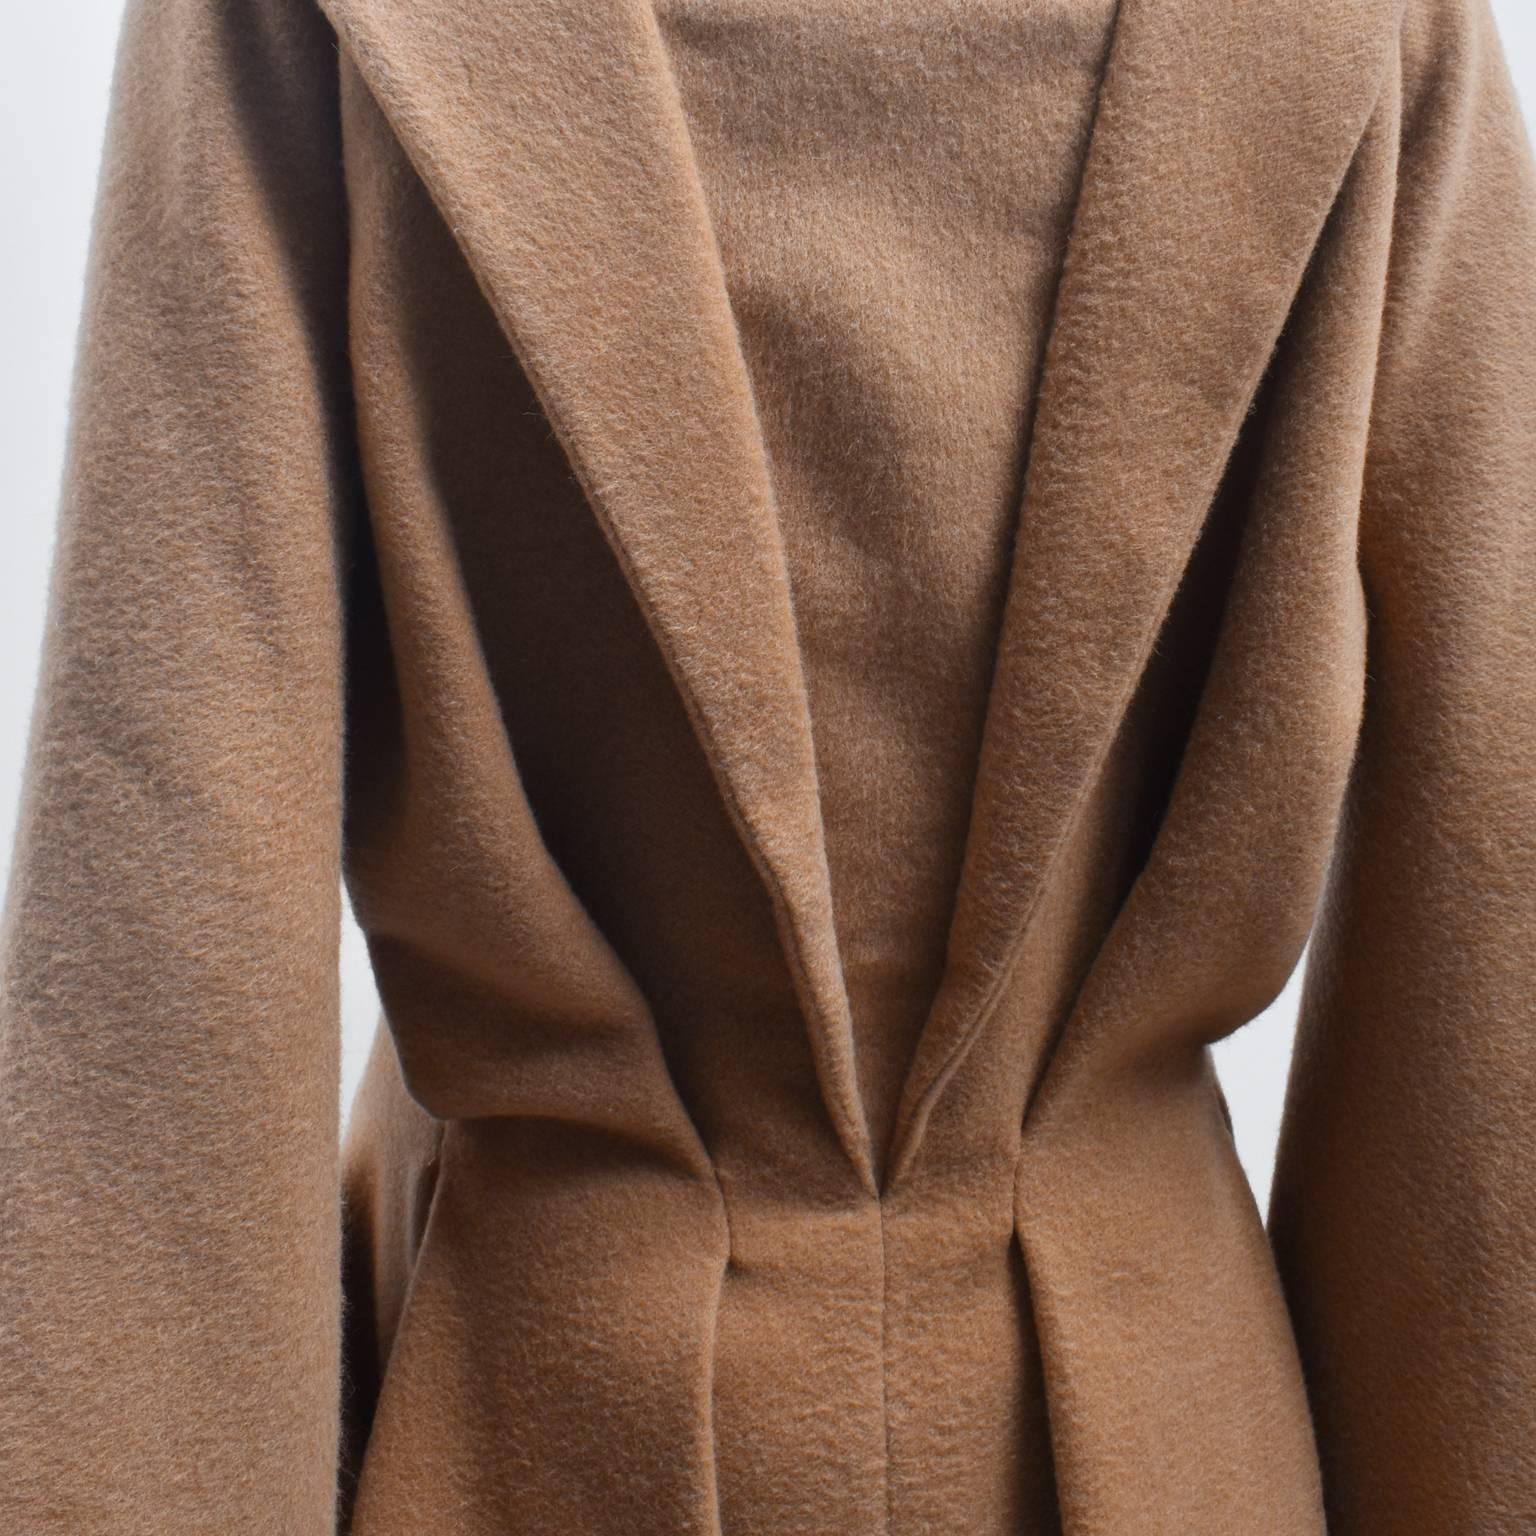 Women's Alexander McQueen Camel Cashmere Coat with Connected Bell Sleeves